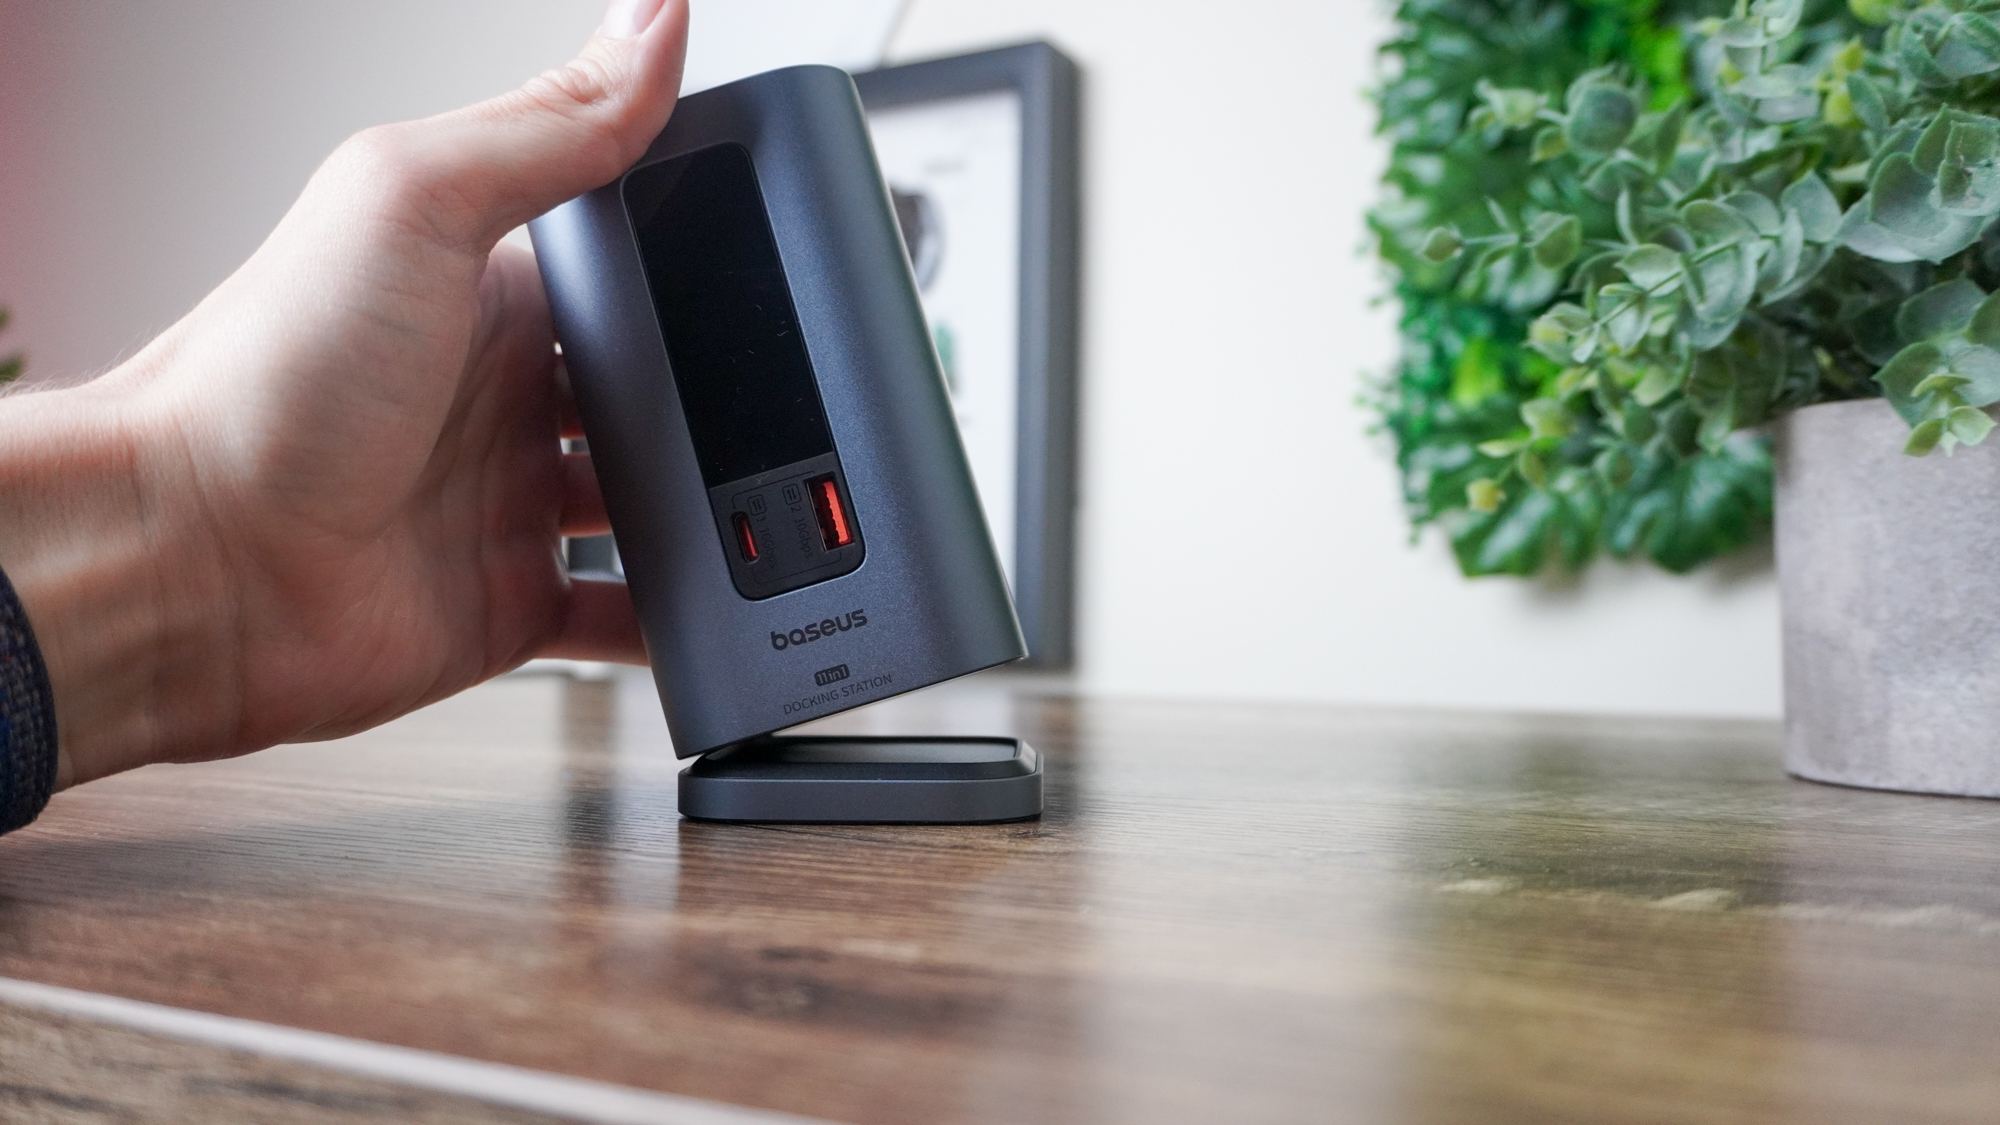 Baseus Spacemate 11-in-1 docking station